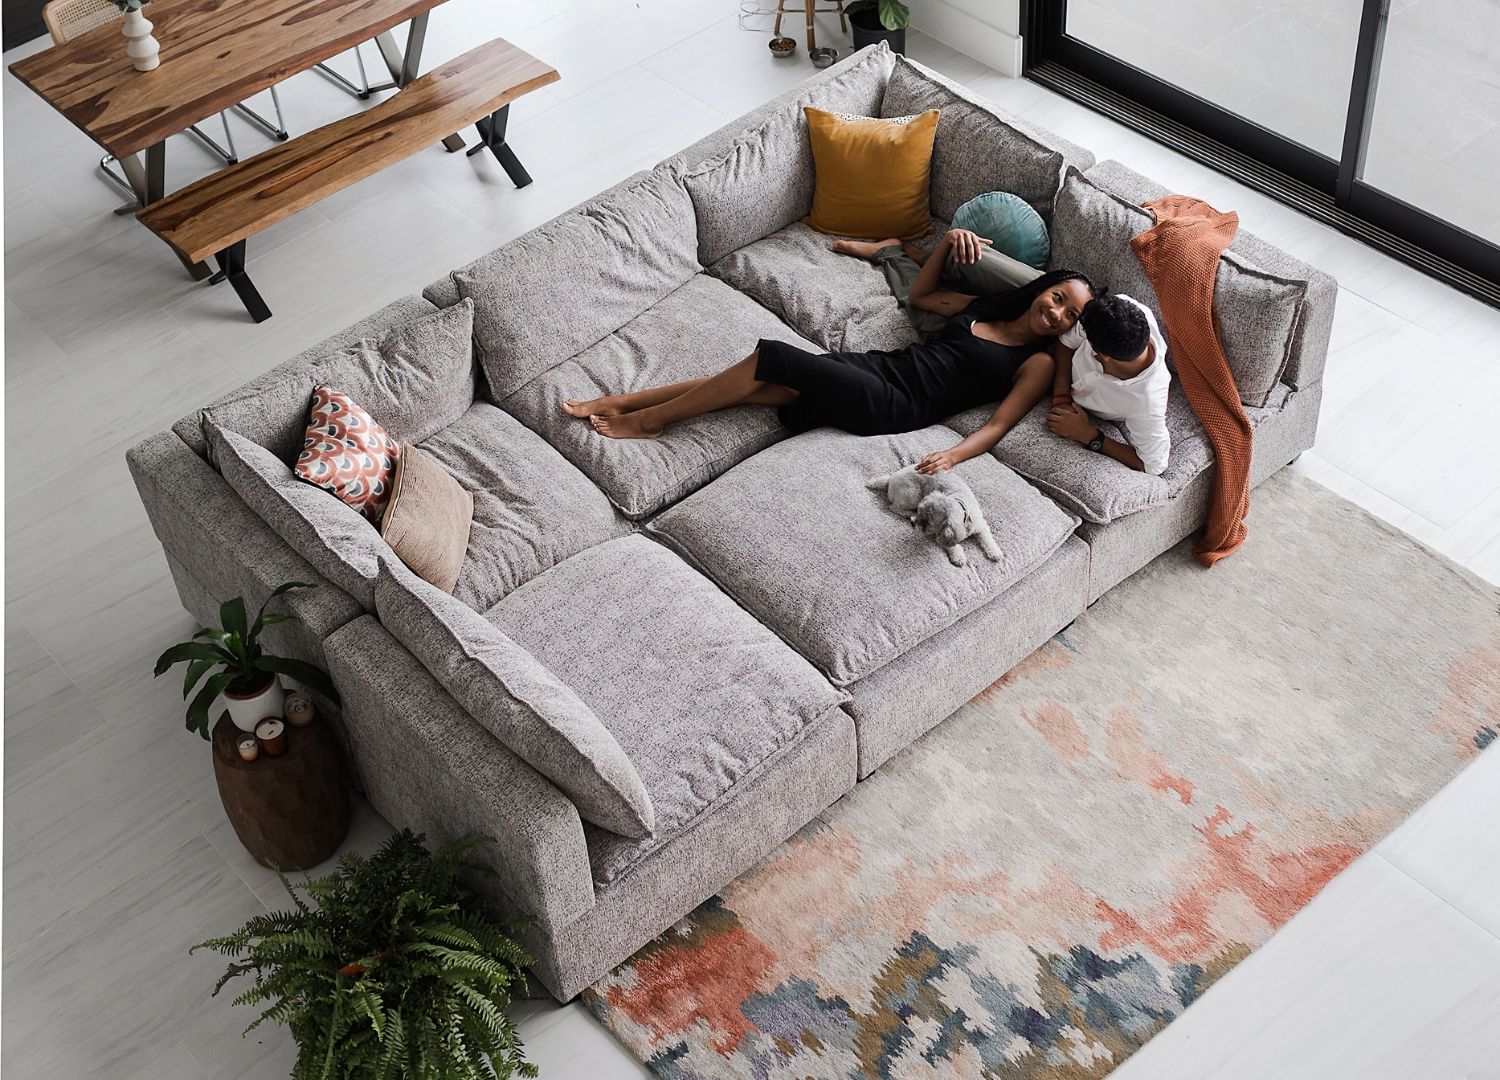 Kova Sofa Collection Is Perfect For